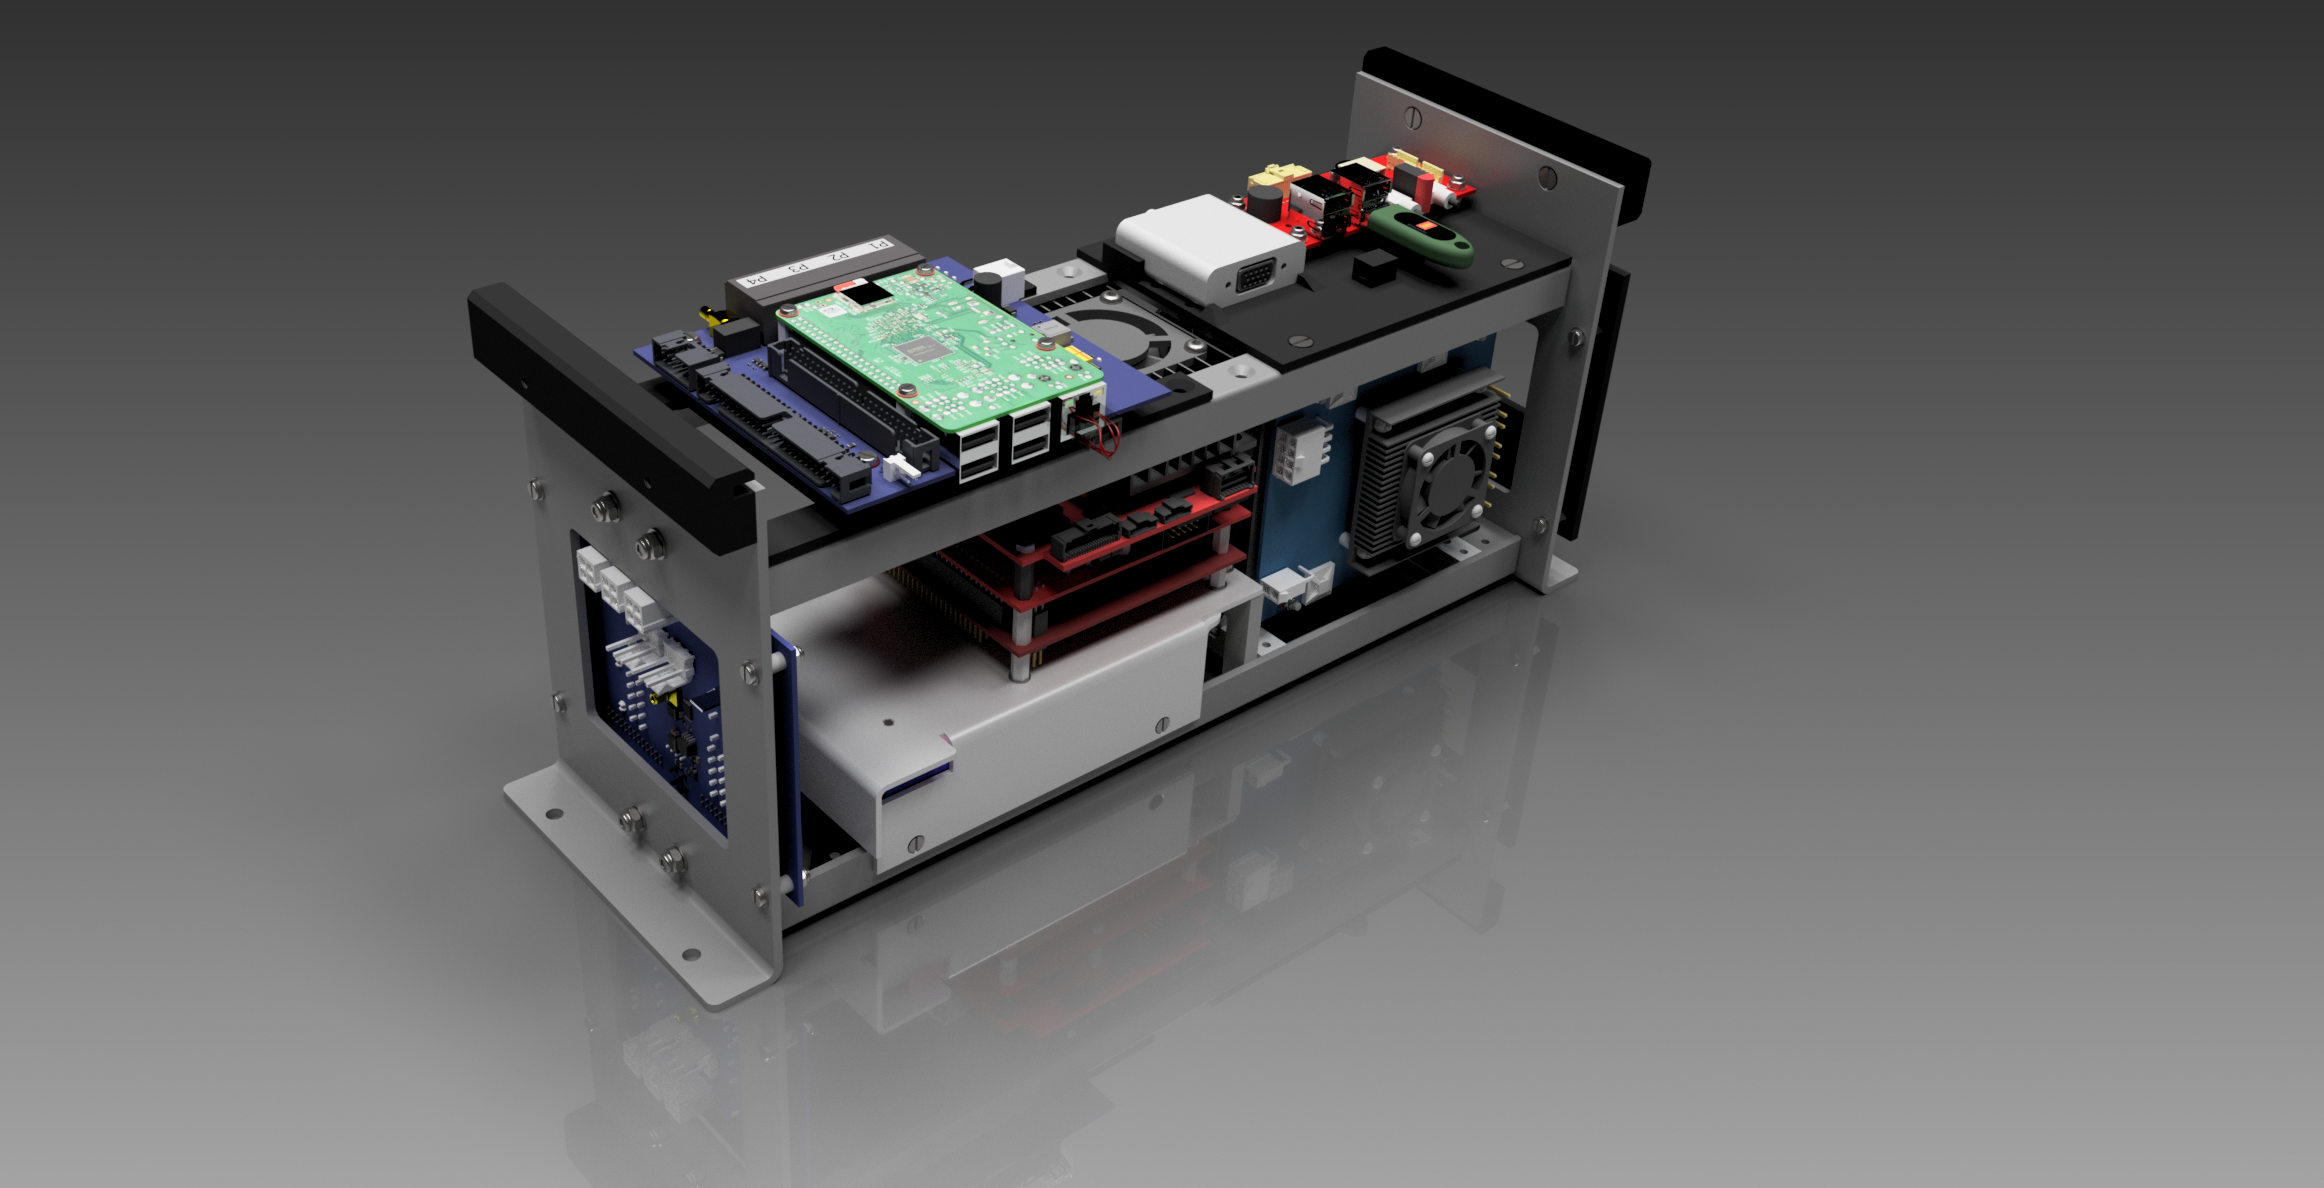 2 GeoSwath USV is designed for easy integration on Unmanned Surface Vessels